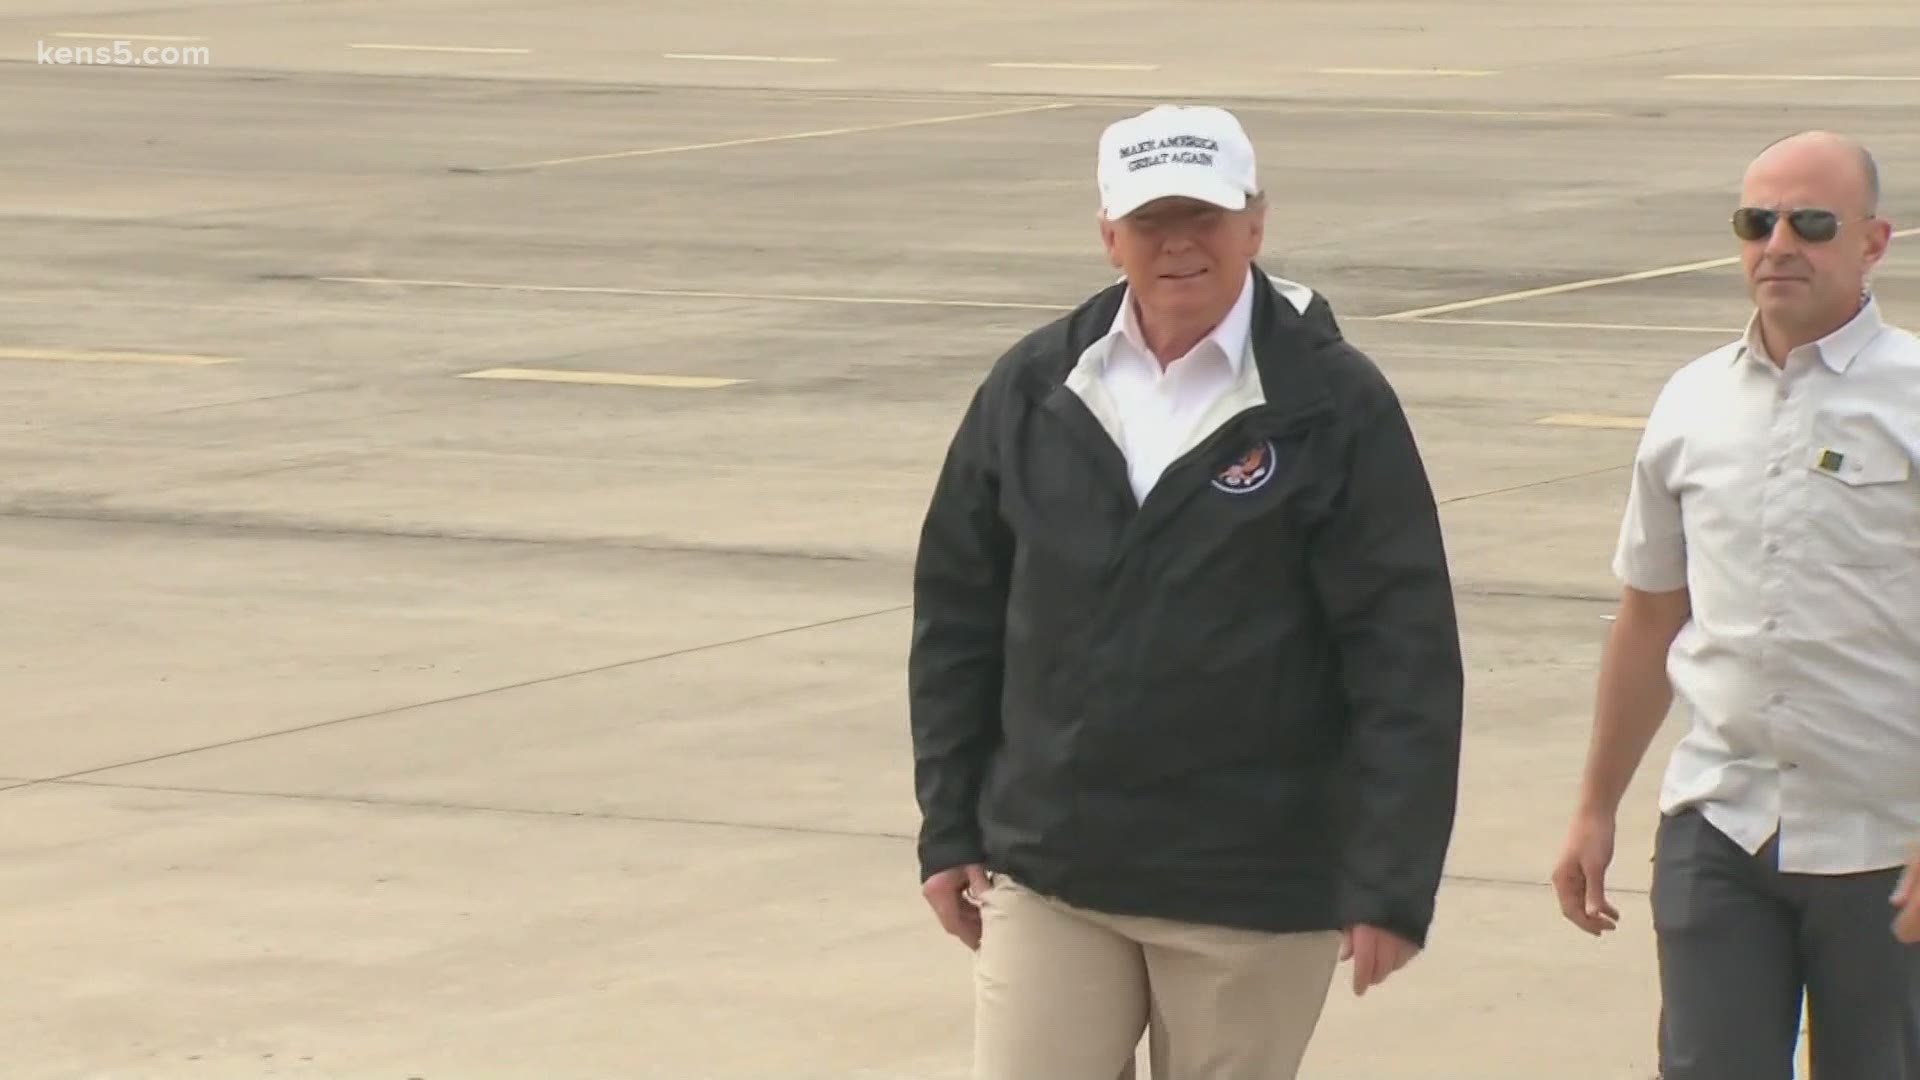 President Donald Trump made a stop in South Texas to mark the completion of a segment of the border wall.